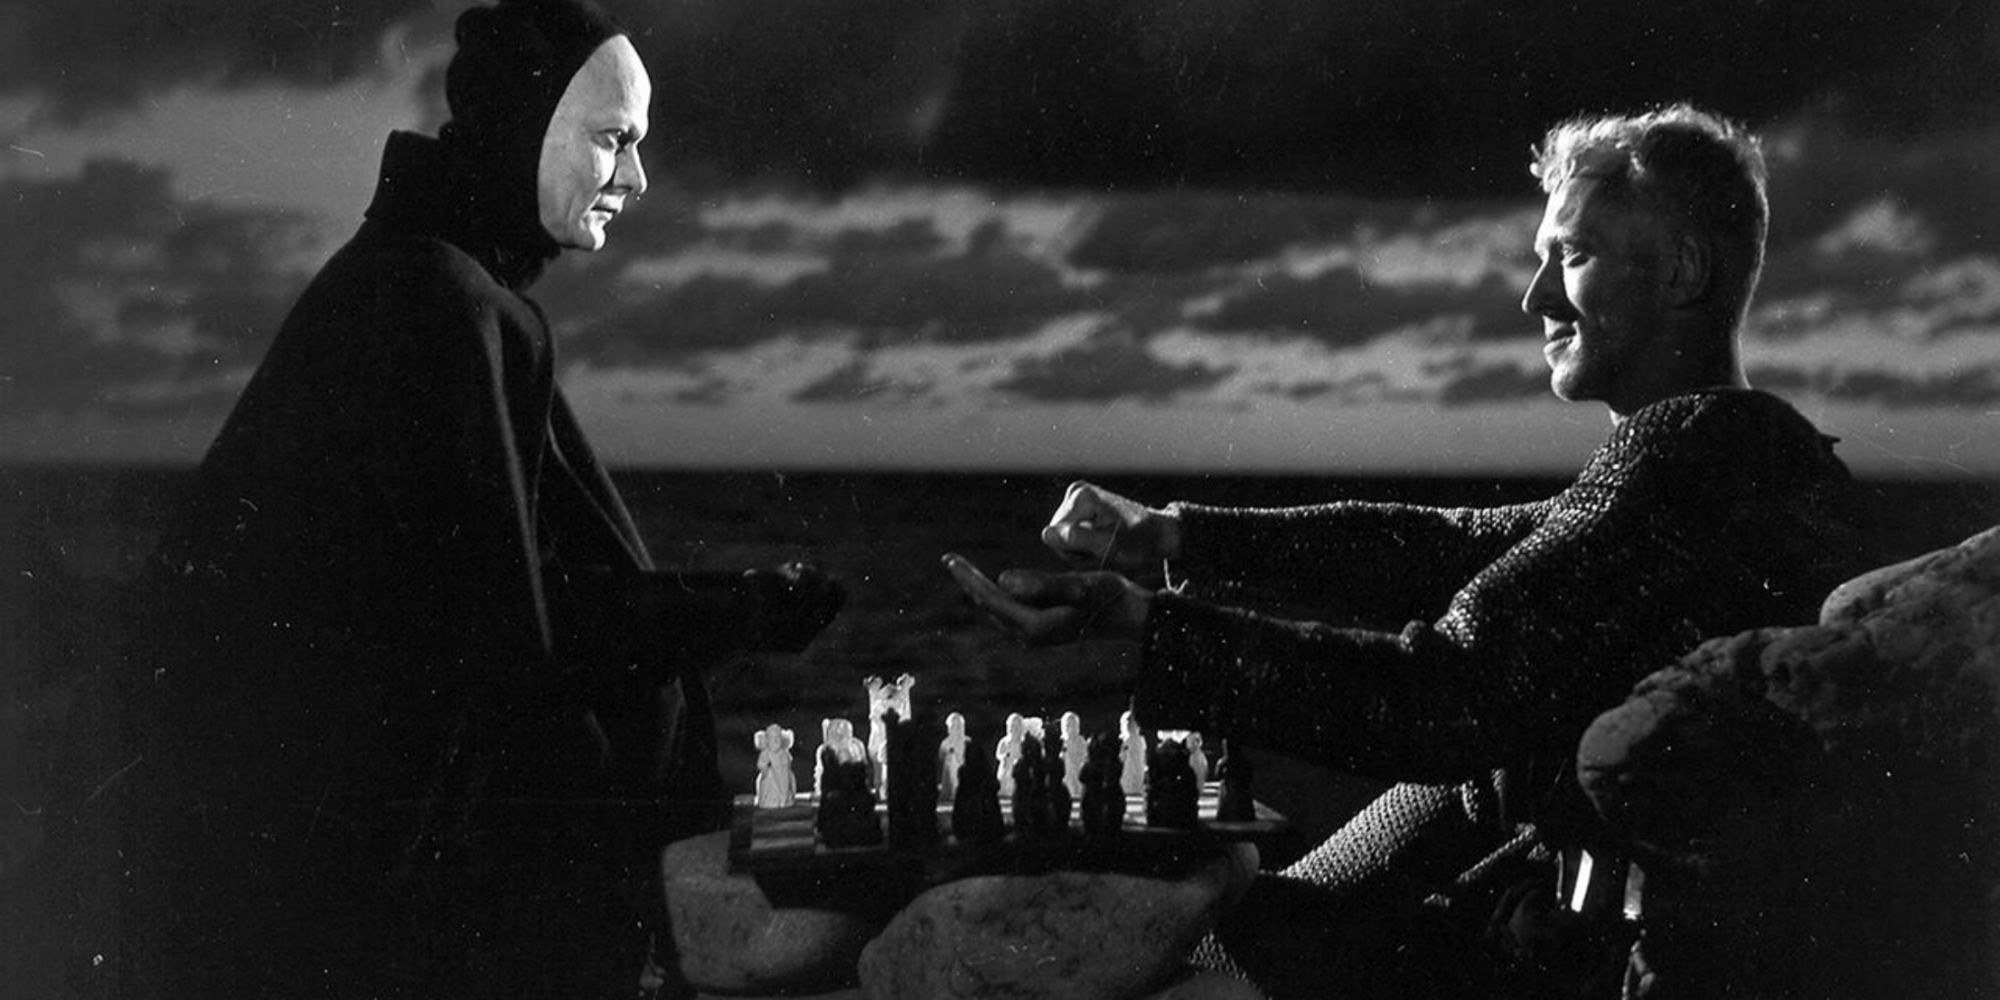 Death and Antonius playing chess in The Seventh Seal.